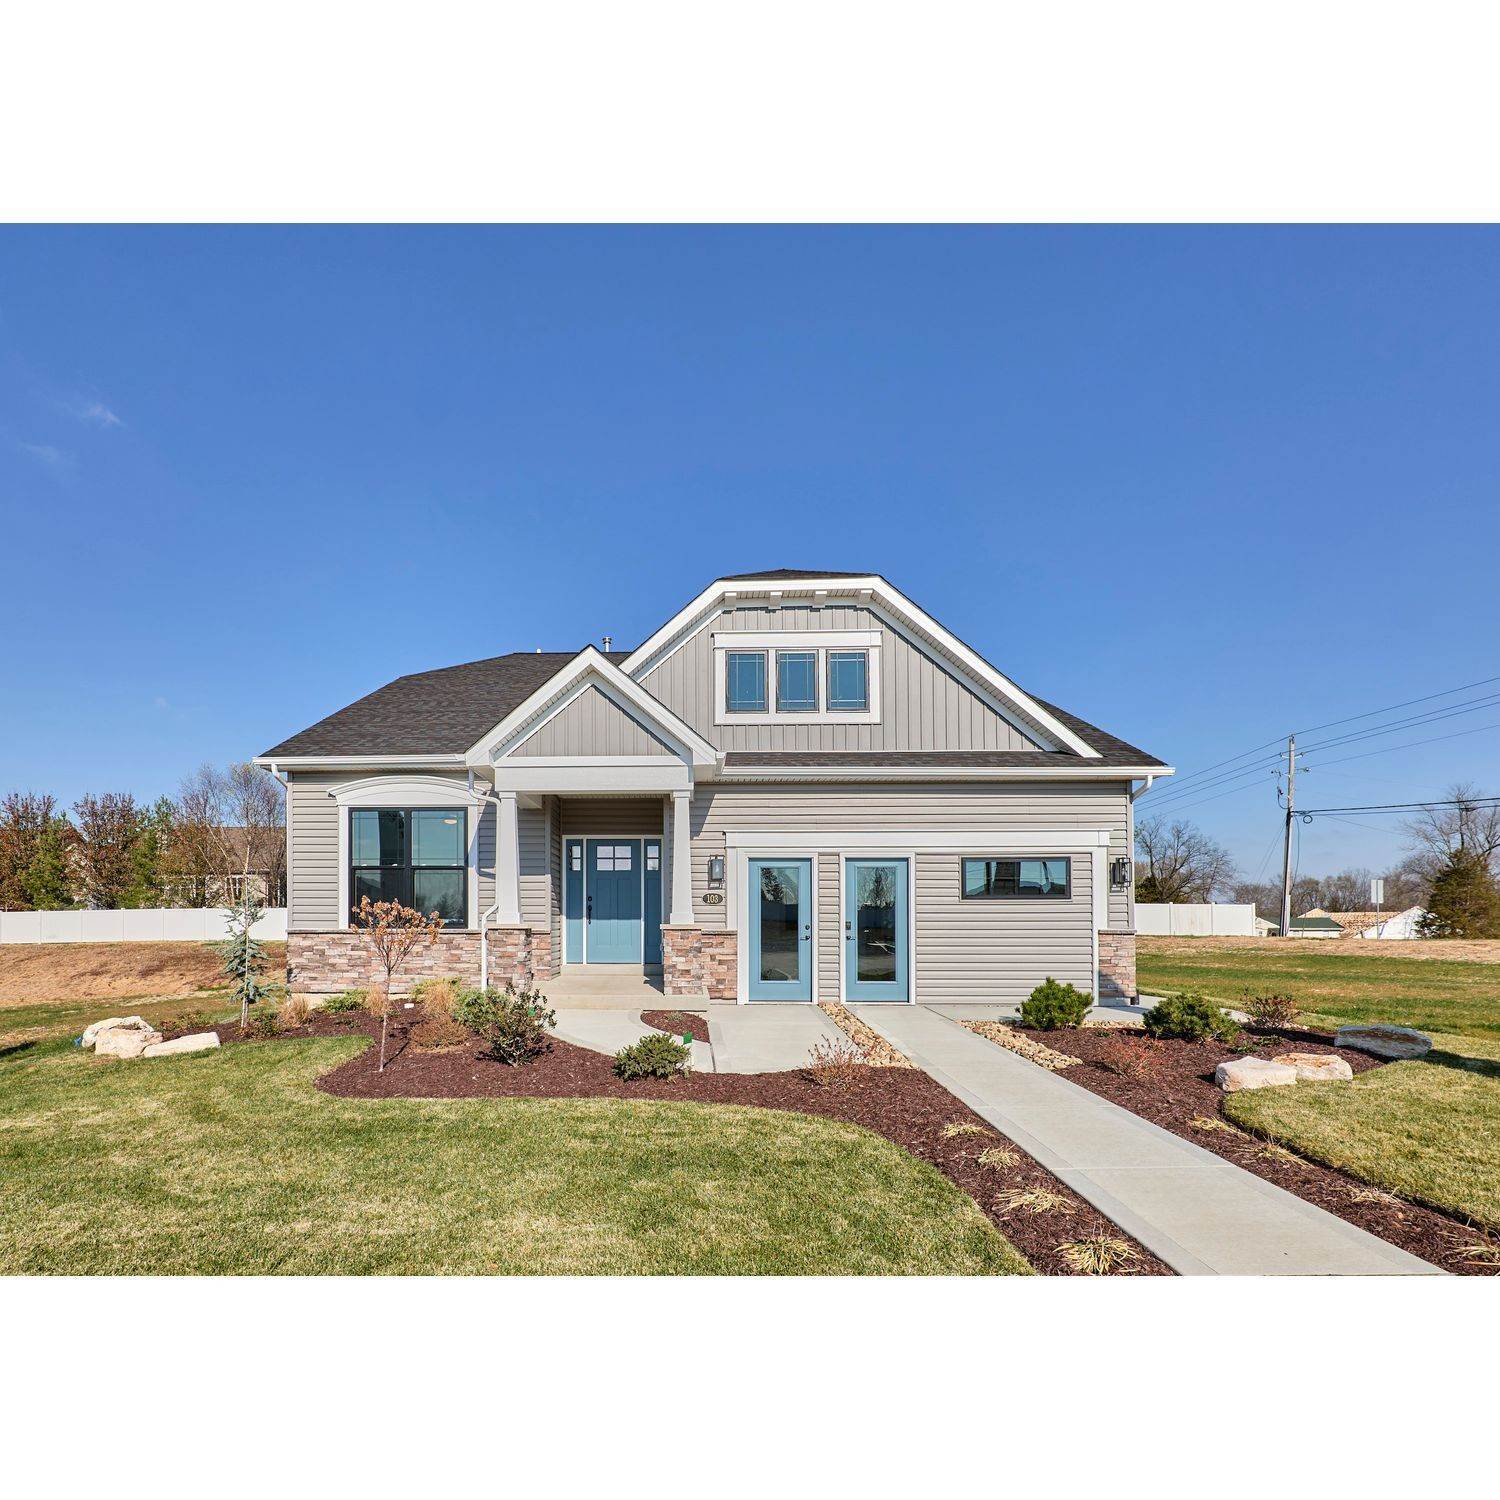 13. Sommerset Estates xây dựng tại 103 Sommerset Ct, O Fallon, MO 63367